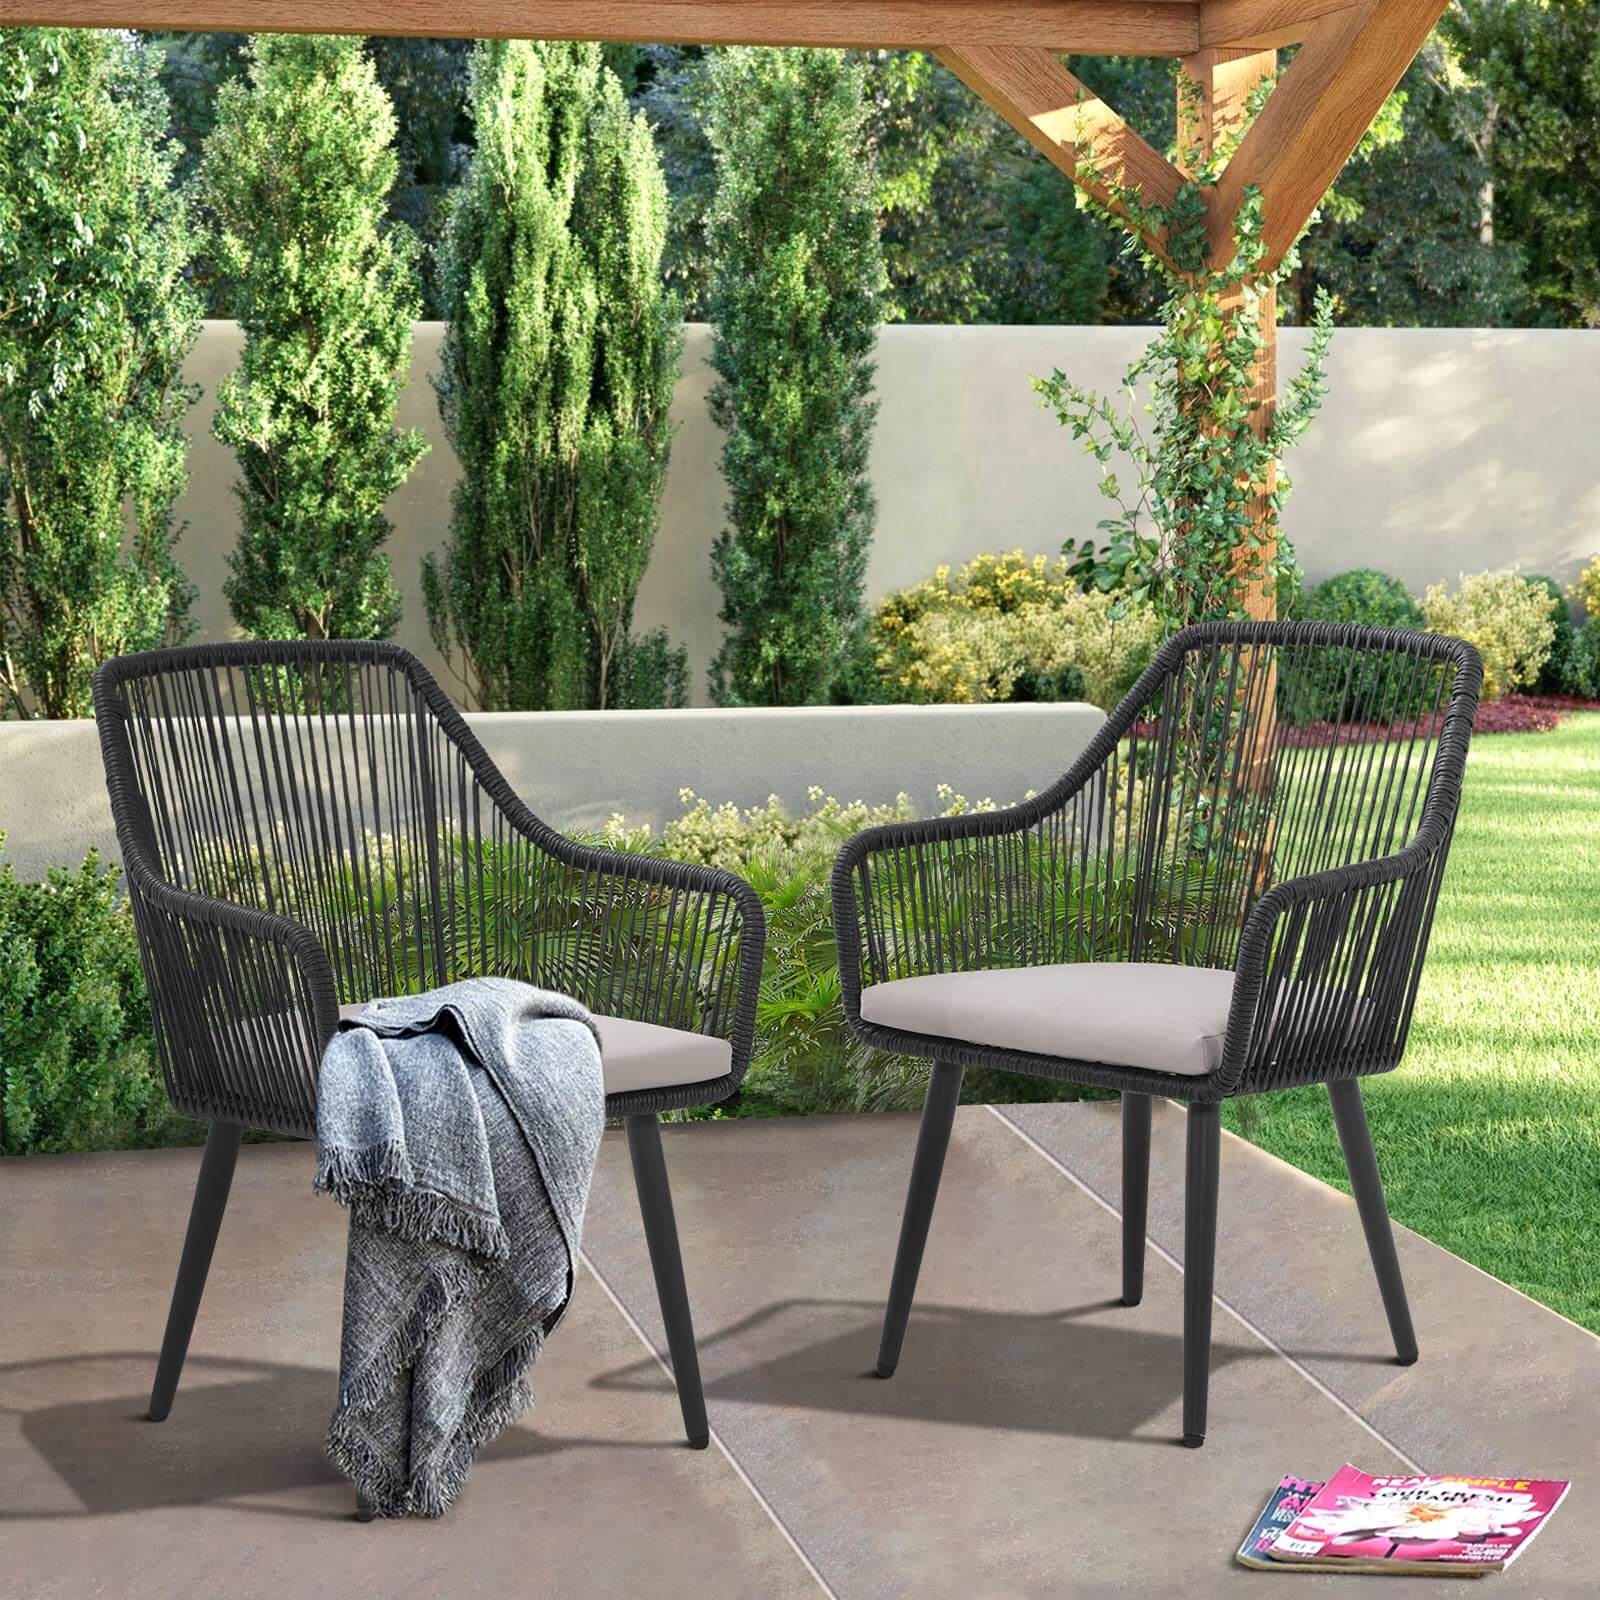 JOIVI Patio Wicker Dining Chairs, 2 Pieces Outdoor Dining Seating, All Weather Rattan Armchairs with Cushions, Indoor/Outdoor for Outside Lawn, Garden